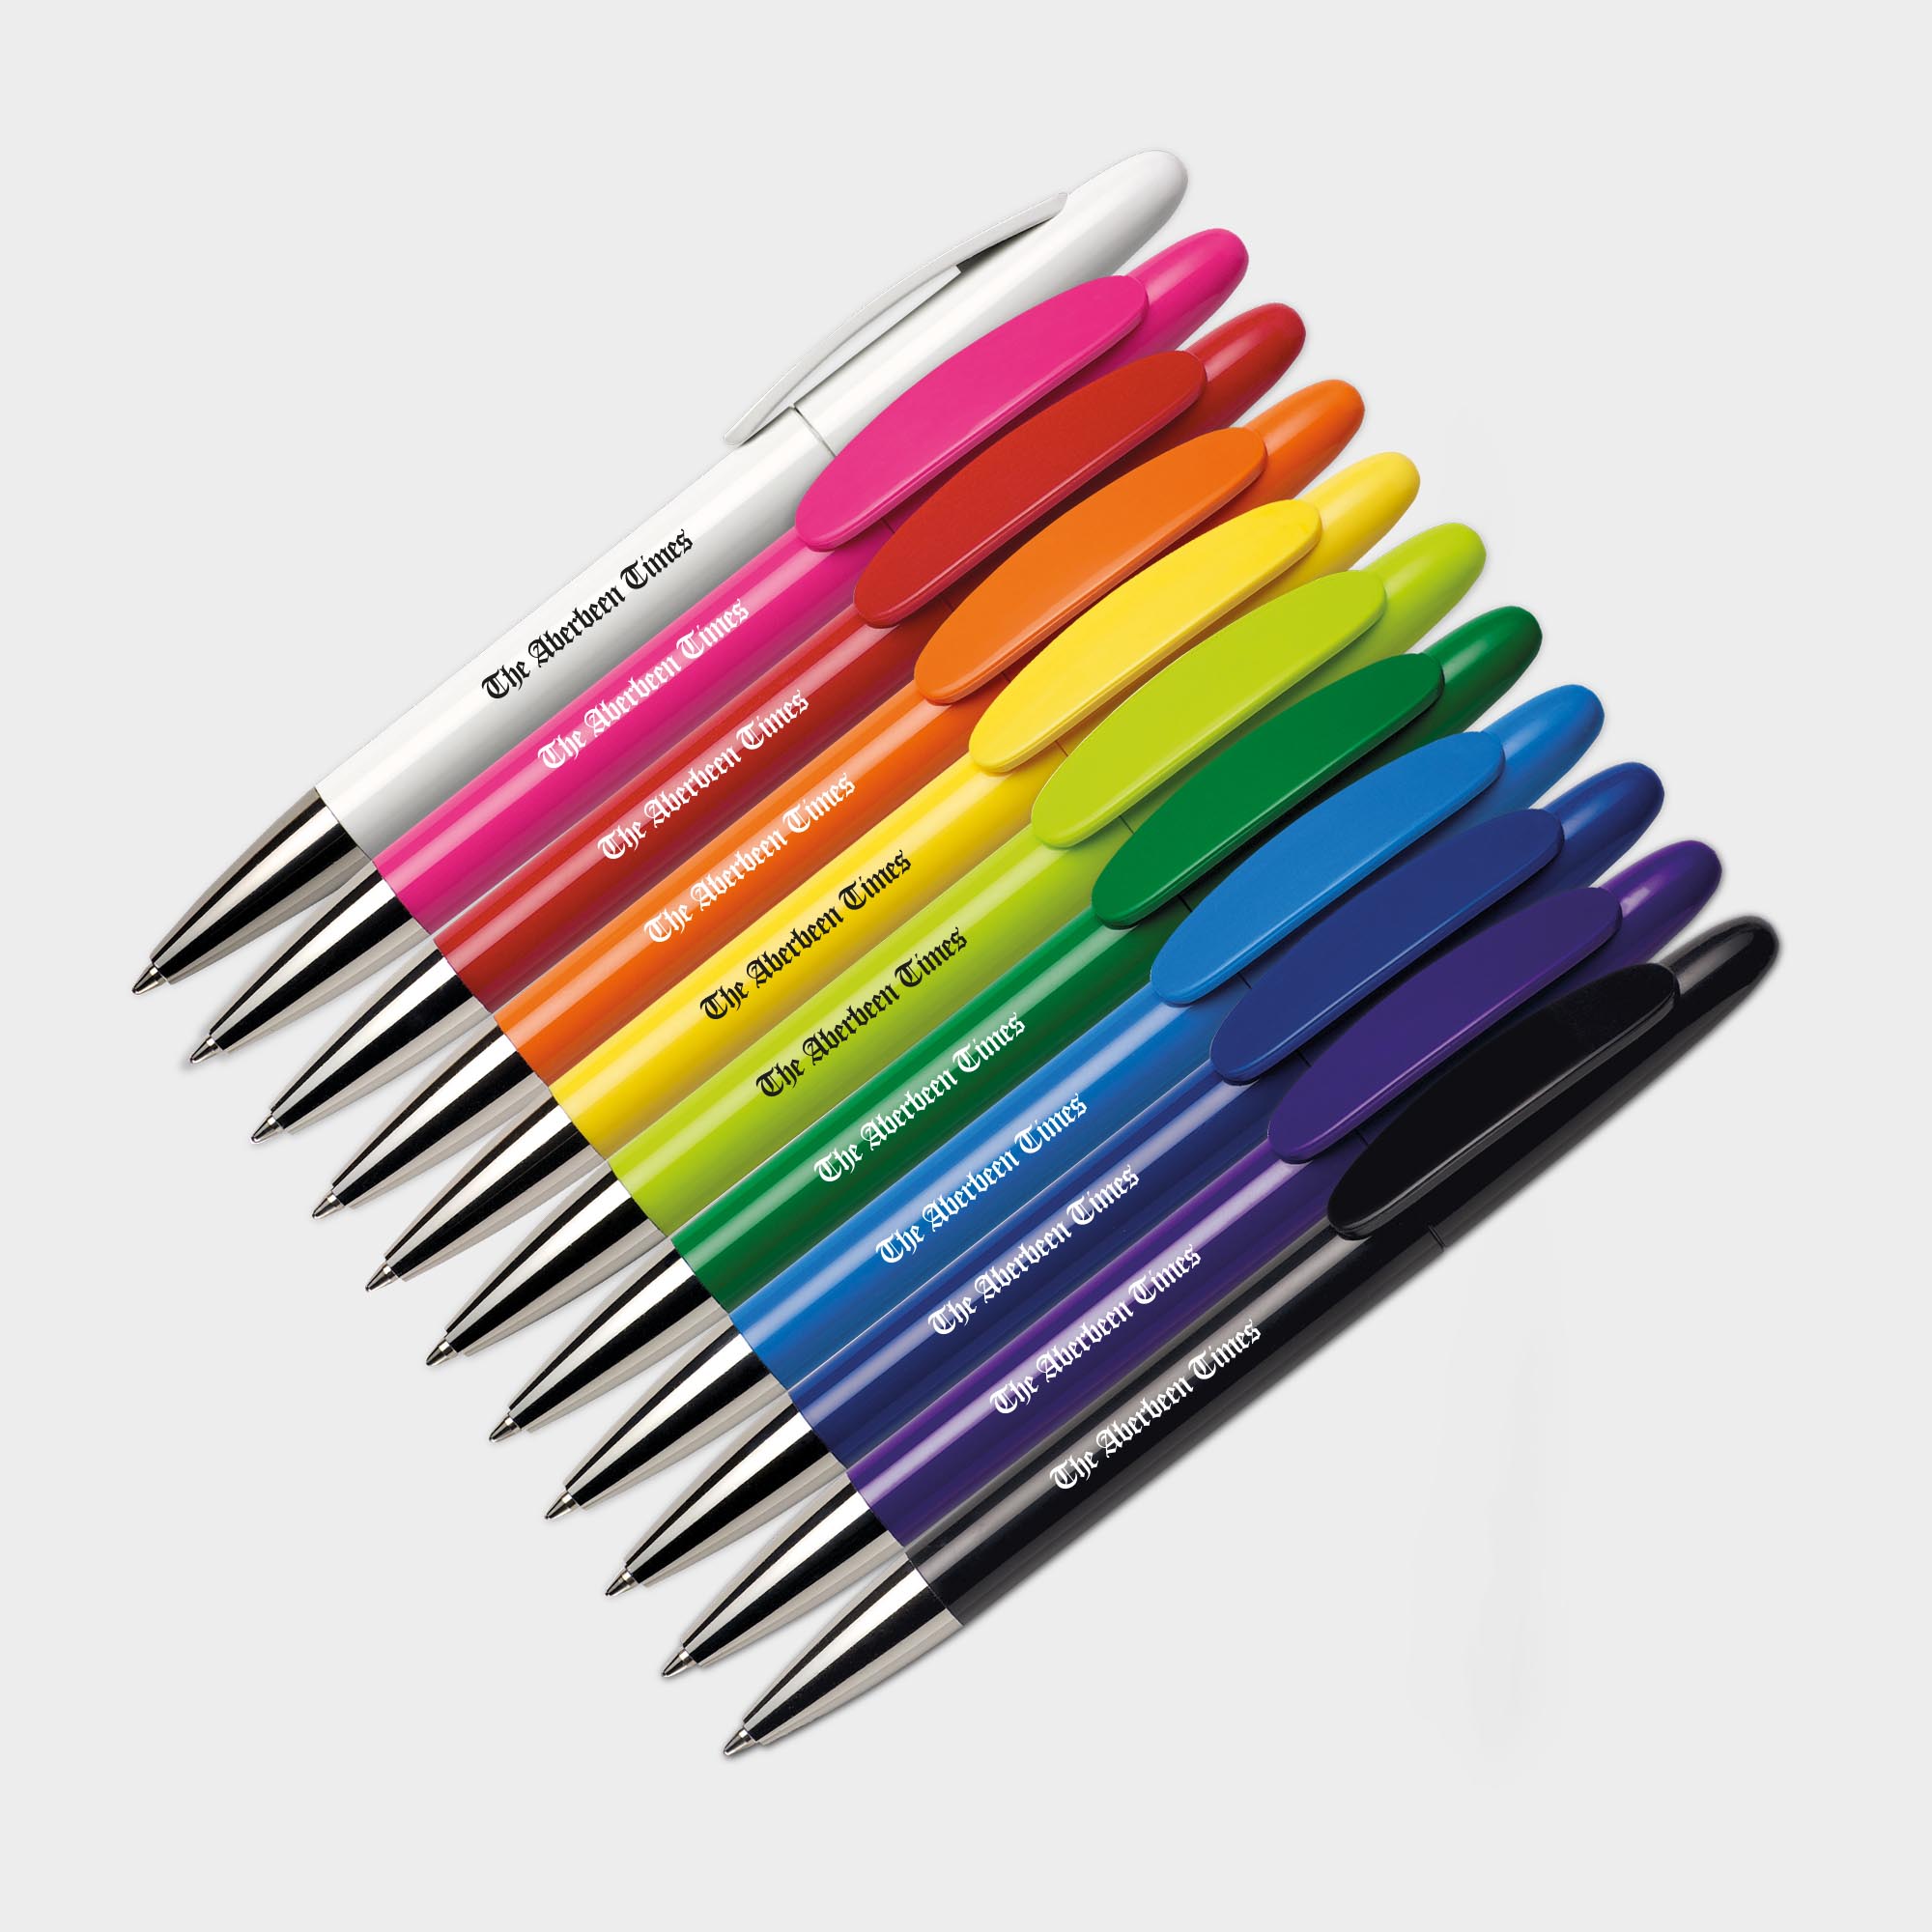 The Green & Good Hudson Pen made from recycled plastic. Stylish executive pen with twist action, available in a variety of popular colours with chrome tip. Nice haptic feel and large print area. Black ink as standard.